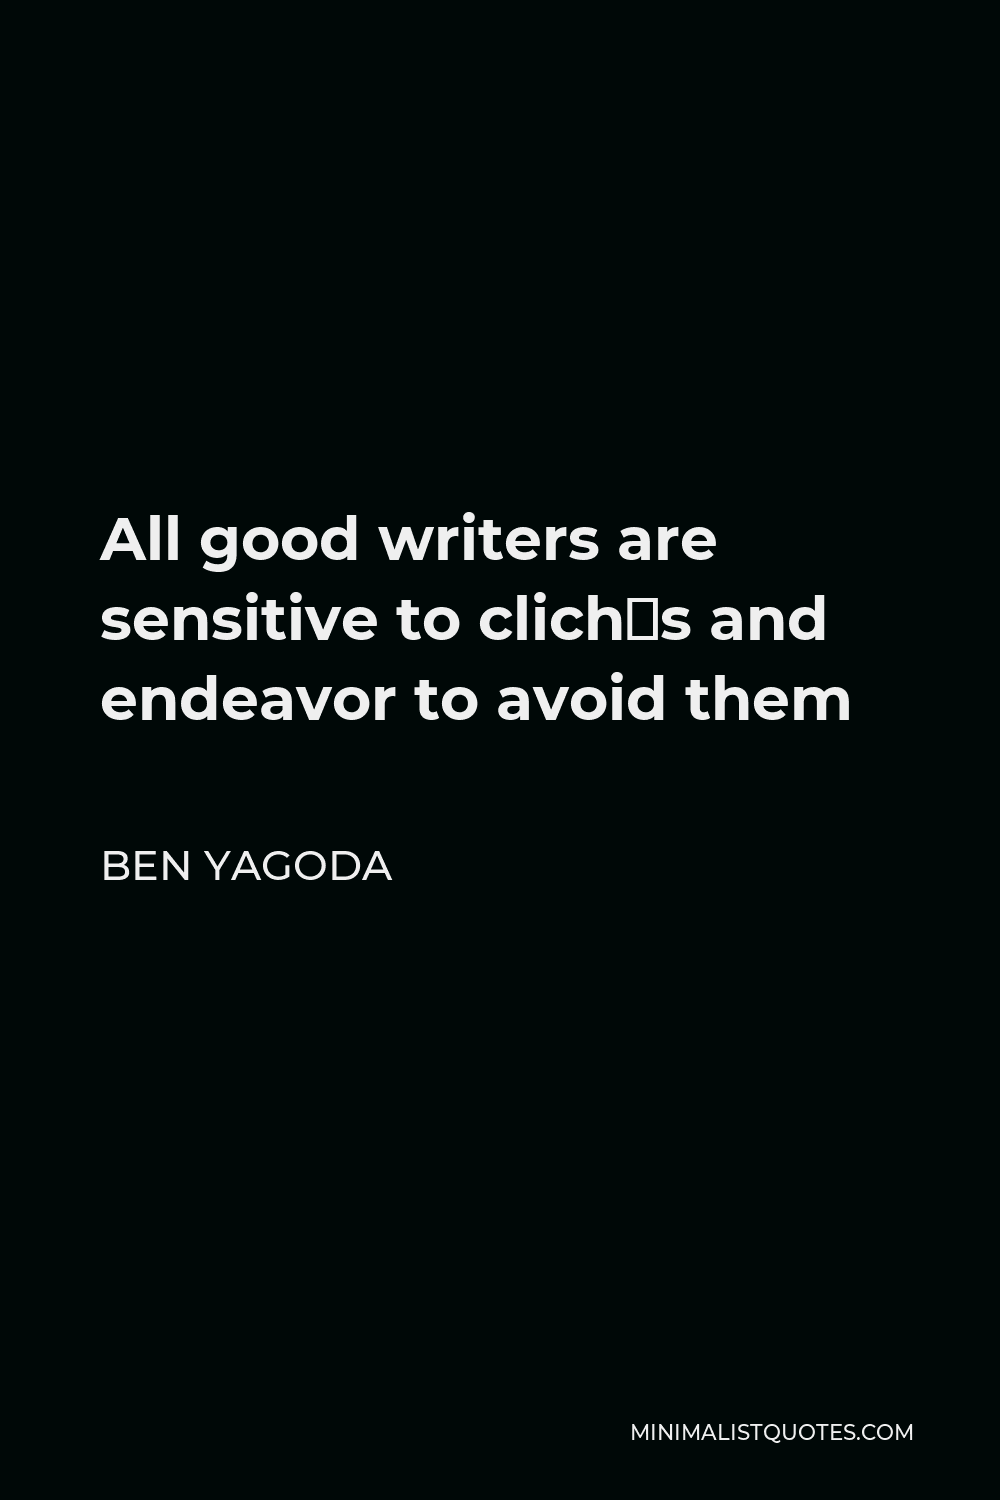 Ben Yagoda Quote - All good writers are sensitive to clichés and endeavor to avoid them